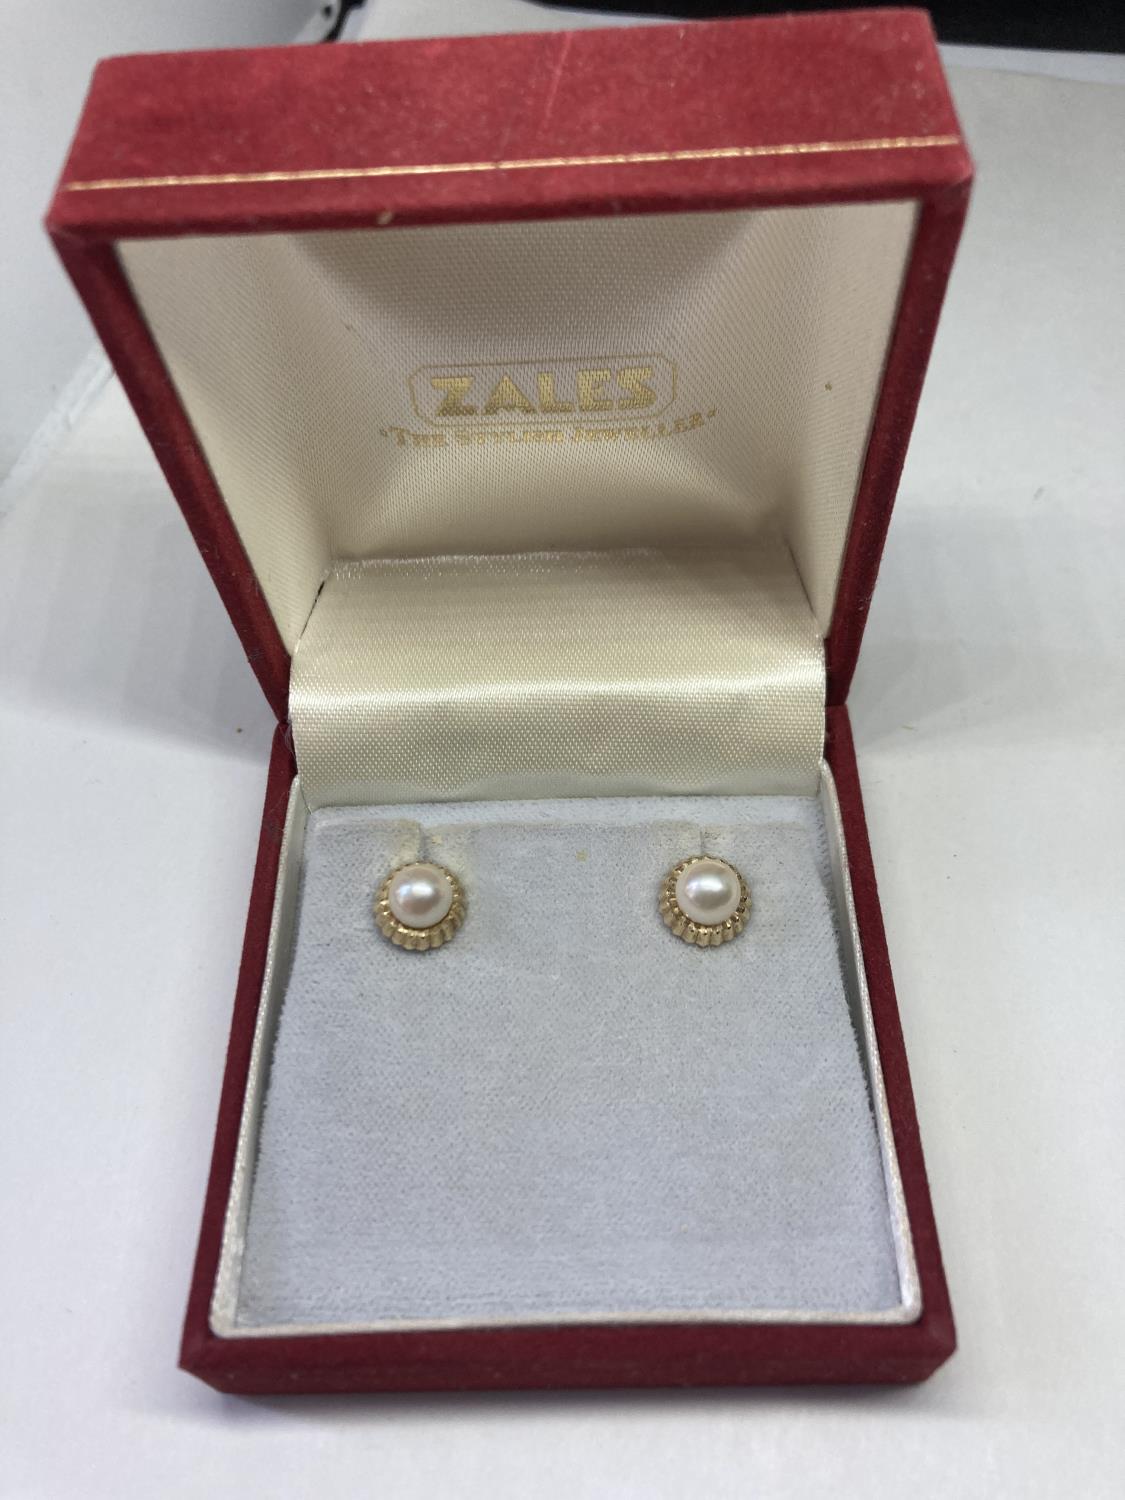 A PAIR OF 9 CARAT GOLD AND PEARL EARRINGS IN A PRESENTATION BOX - Image 2 of 8